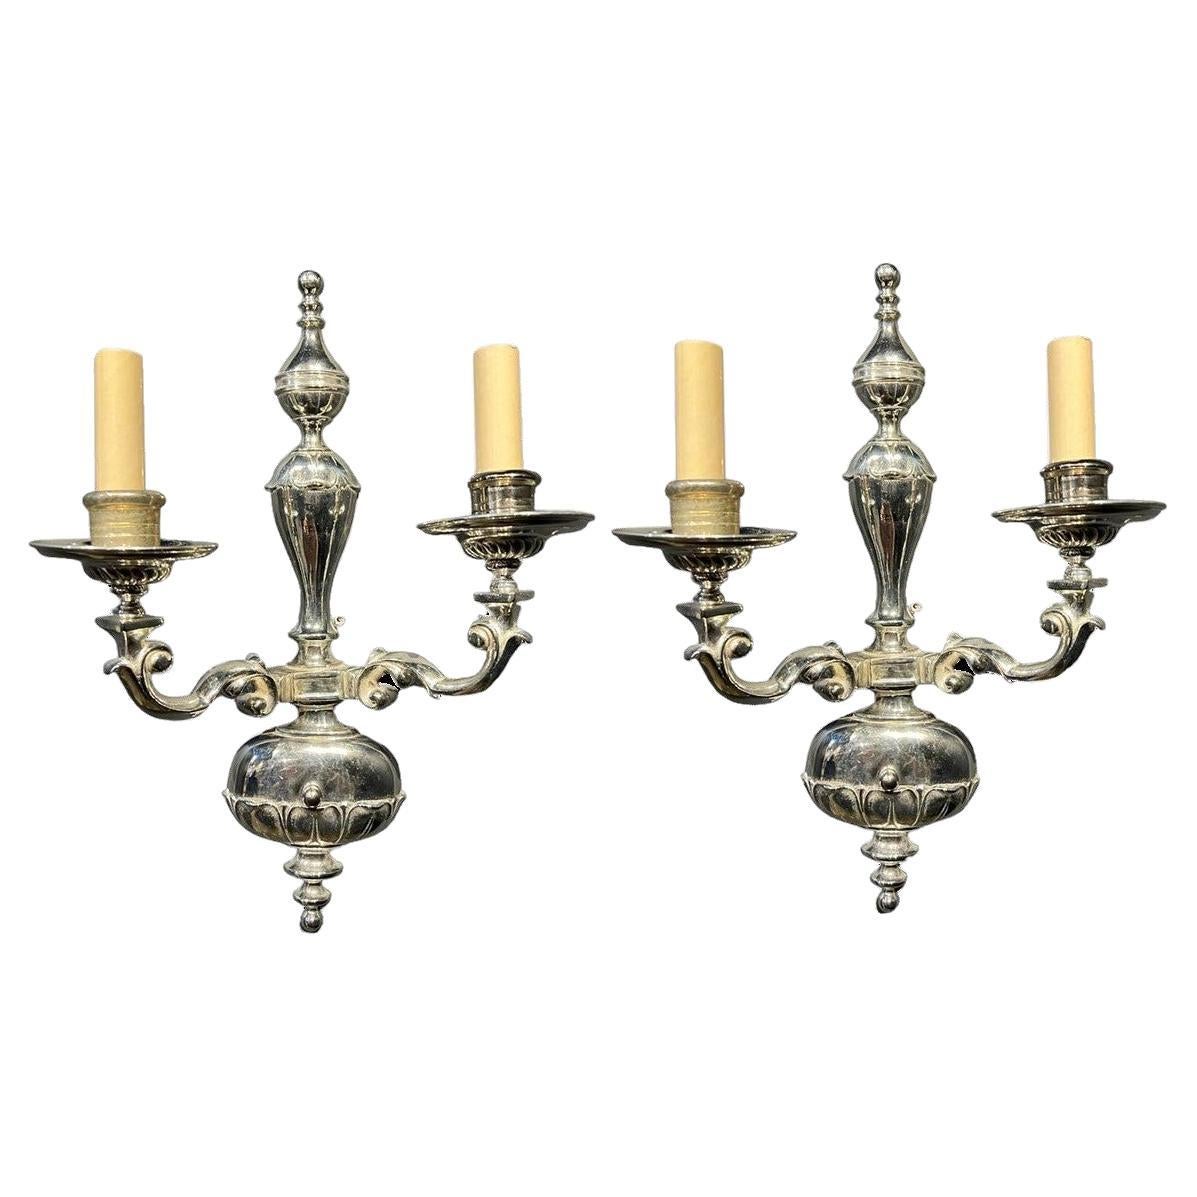 1920's Caldwell Silver Plated Double Light Sconces For Sale